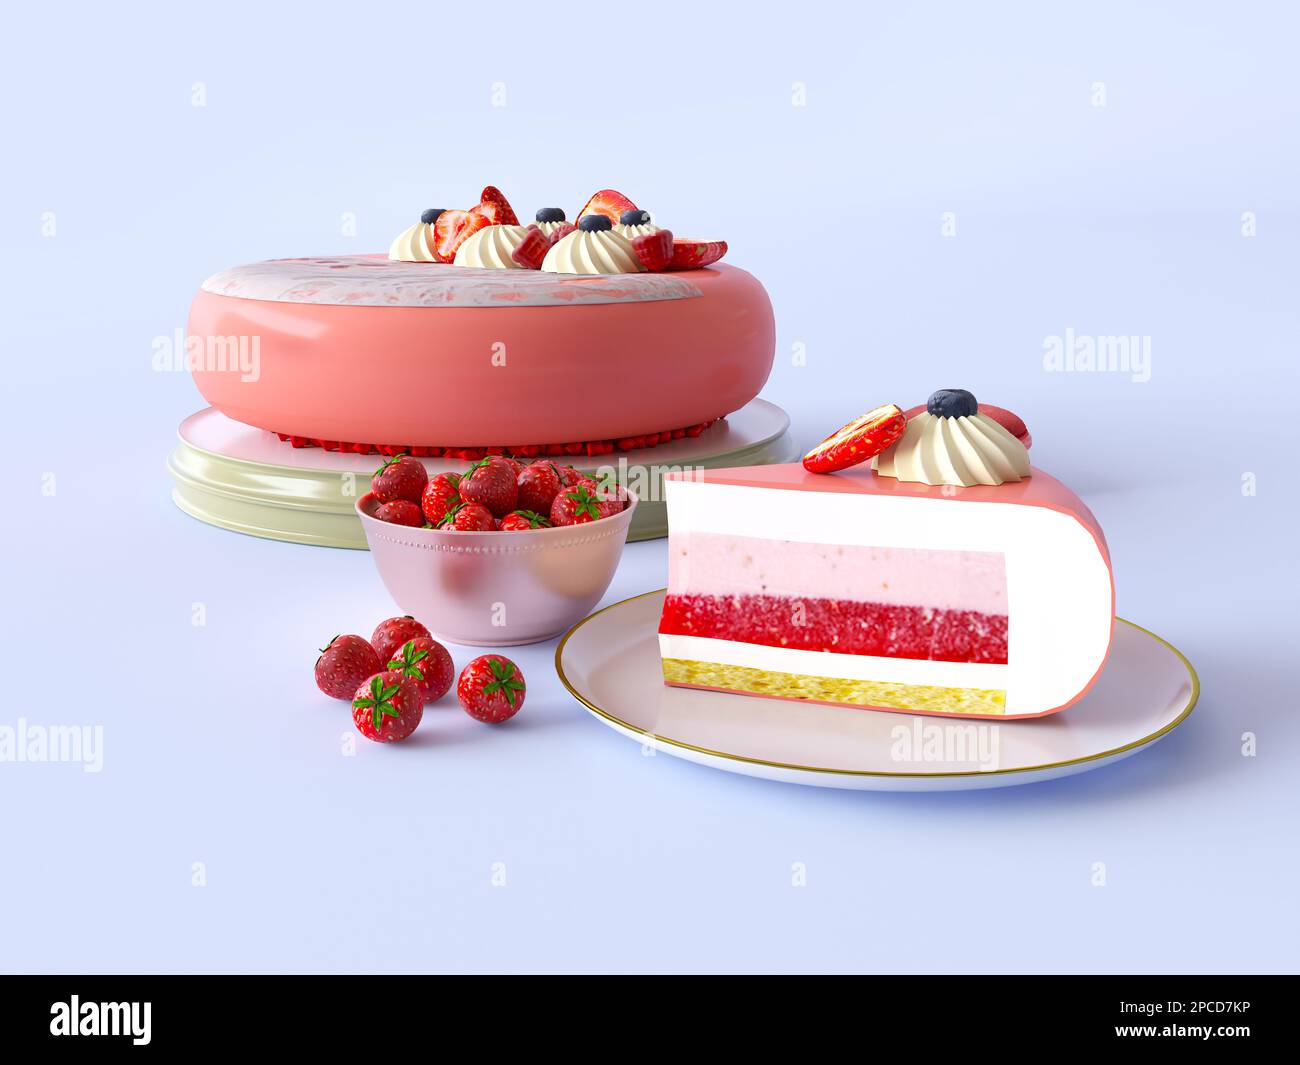 Mousse cake with mirror glaze pink, ripe strawberries and berries. A slice of a delicious cake on a plate, little vase with strawberries isolated Stock Photo